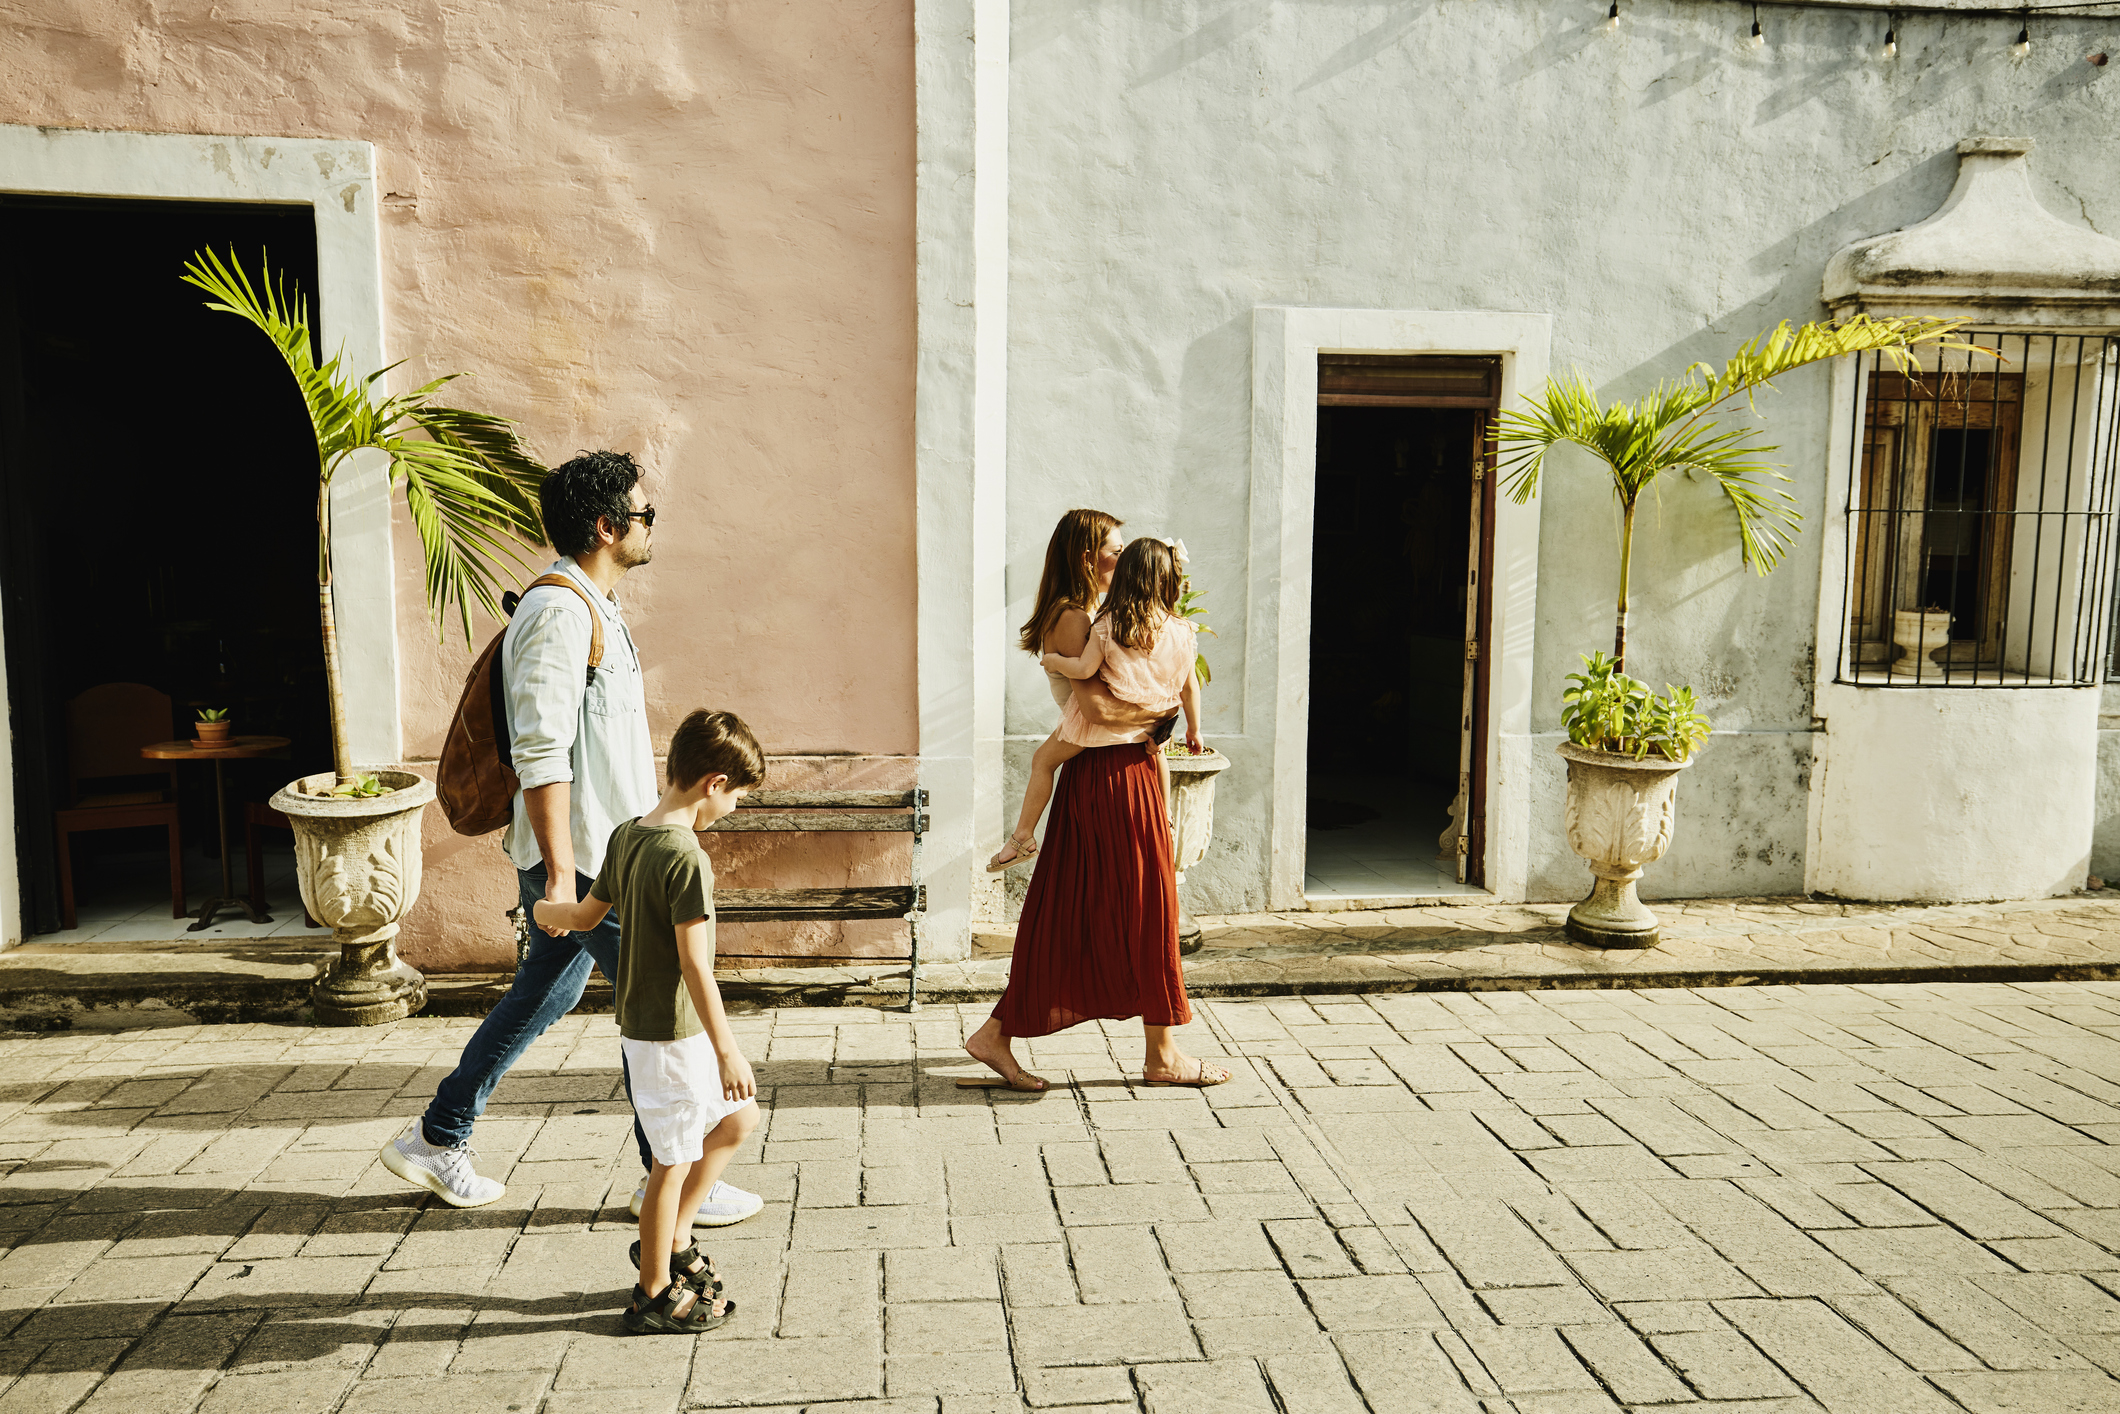 Wide shot of family walking down street while exploring town during vacation